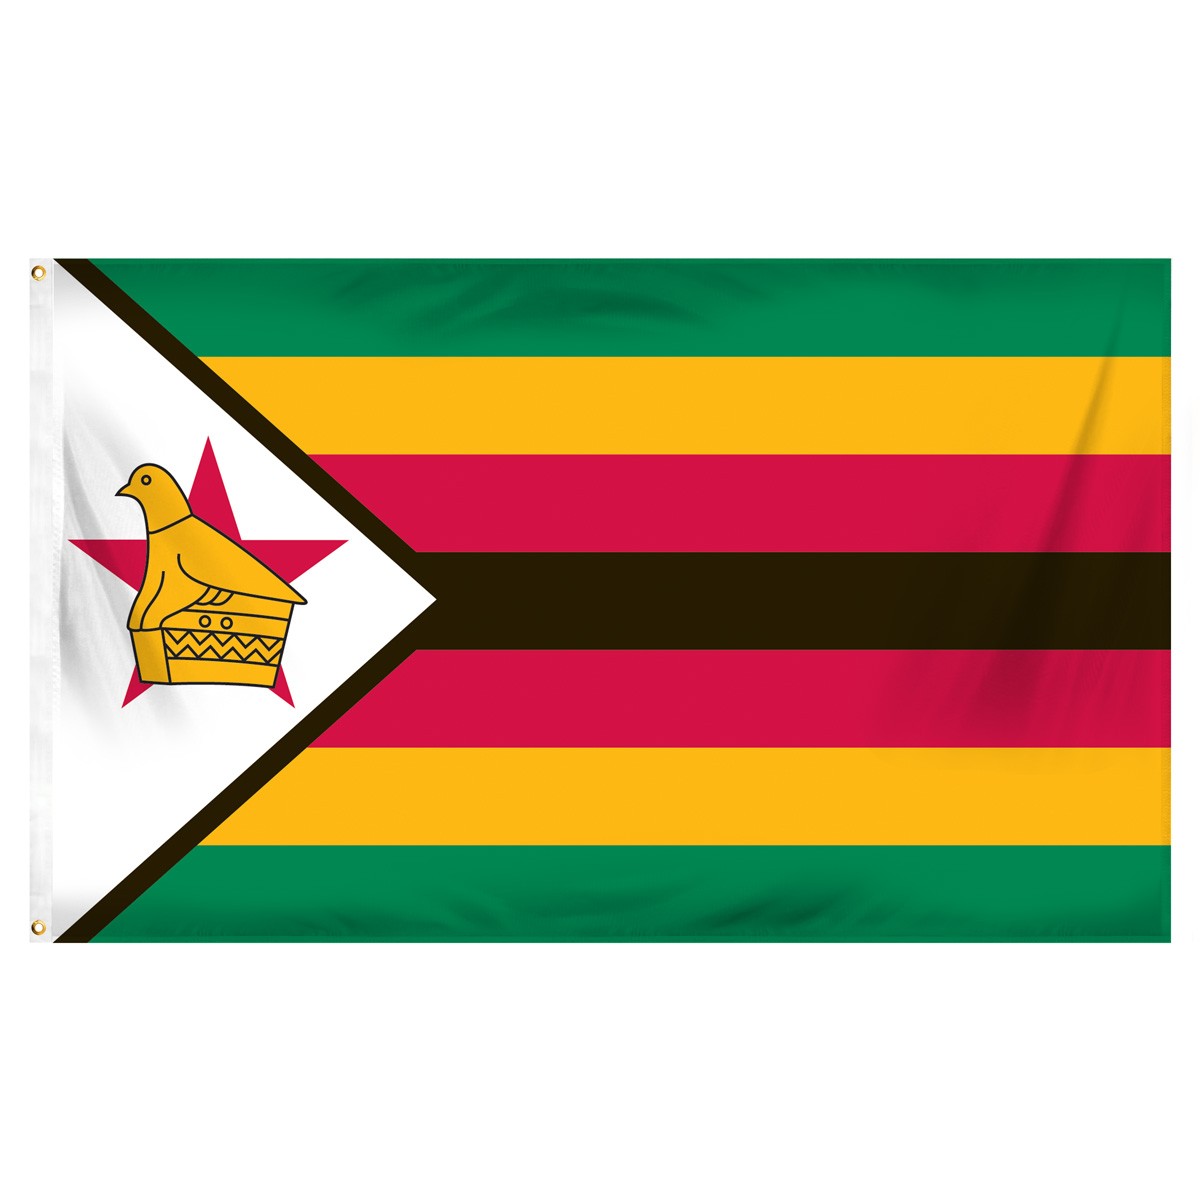 Zimbabwe Building Pennants and Flags